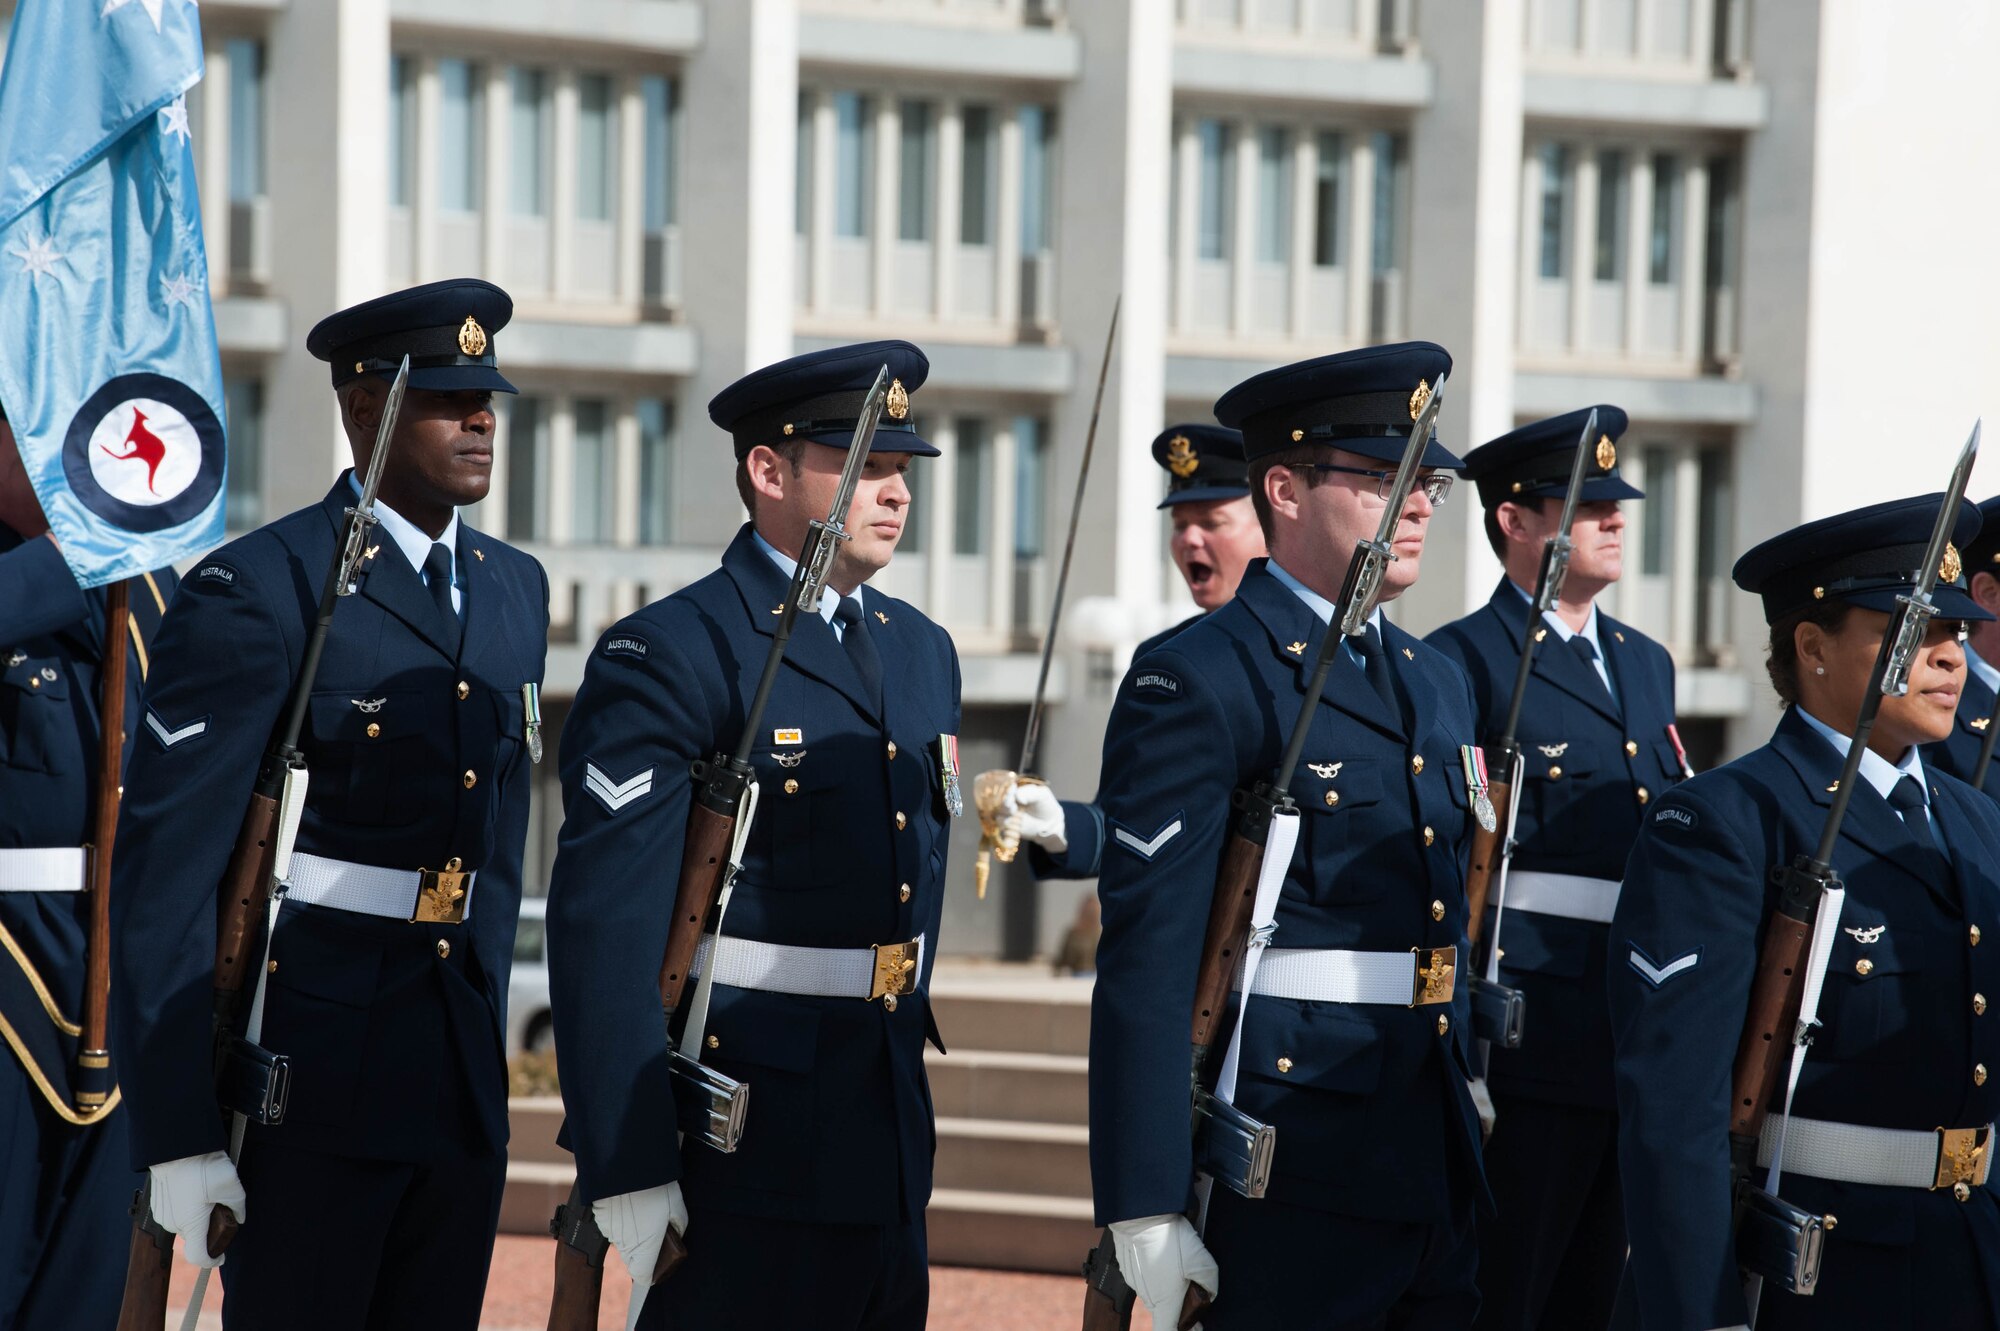 Members from Australia’s Federation Guard and the band prepare for the Honor Guard Ceremony to welcome Gen. CQ Brown, Jr., Pacific Air Forces commander, upon his arrival to the Russell Offices, Canberra, Australia, Aug. 10, 2018. His first trip to the region since taking command on July 26, 2018, Brown met with key defense and military leaders in Canberra and Royal Australian Air Force Bases Williamtown, Tindal and Darwin to see first-hand the strength of the U.S.-Australia alliance and discuss opportunities to ensure a free and open Indo-Pacific region. (U.S. Air Force photo by Staff Sgt. Hailey Haux)